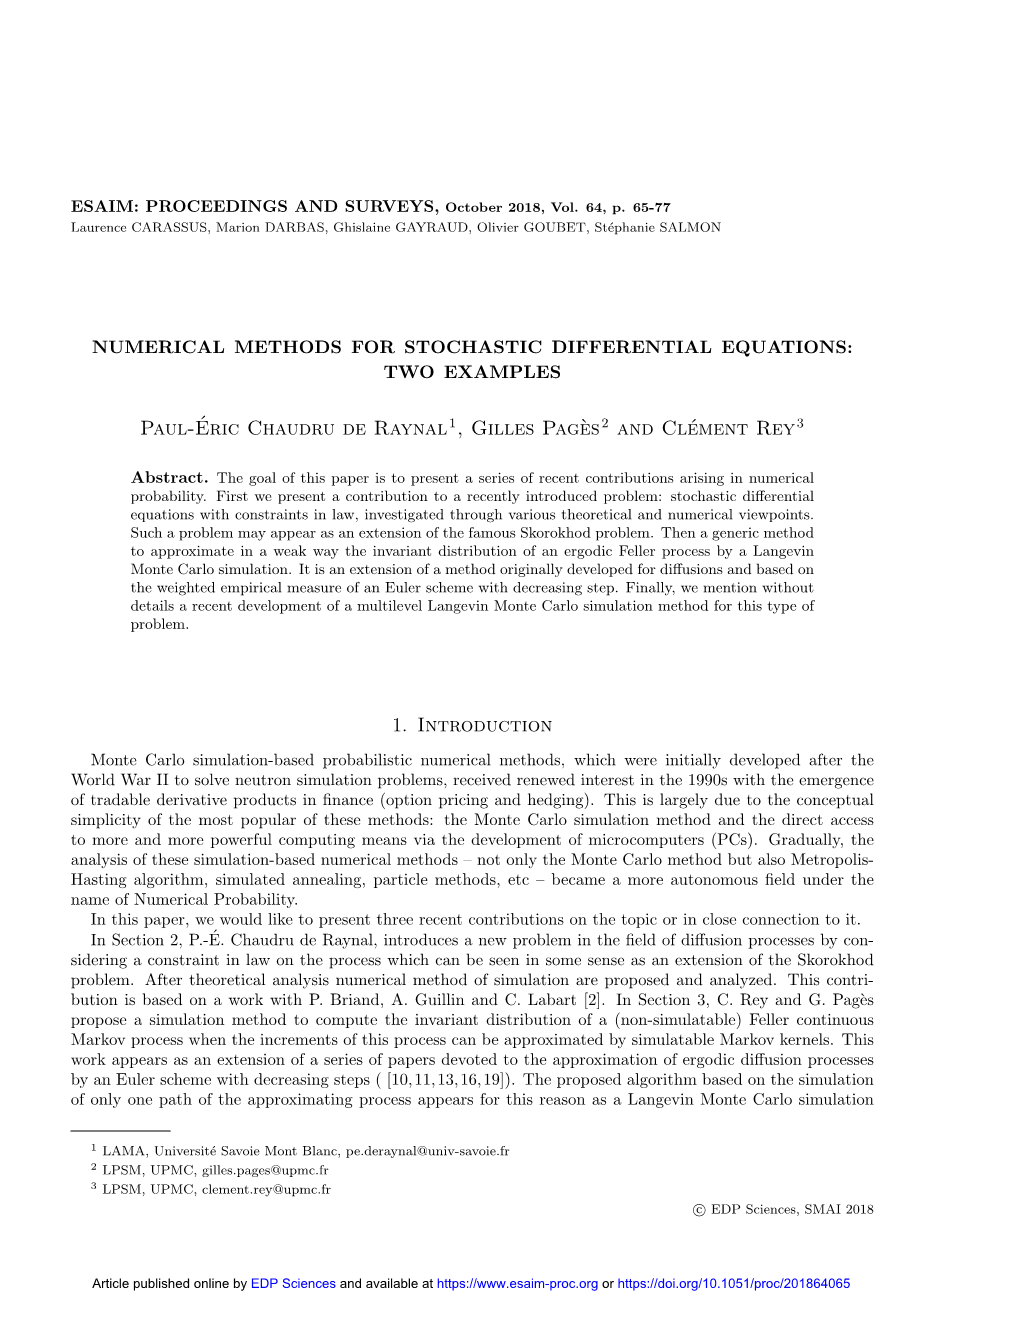 Numerical Methods for Stochastic Differential Equations: Two Examples